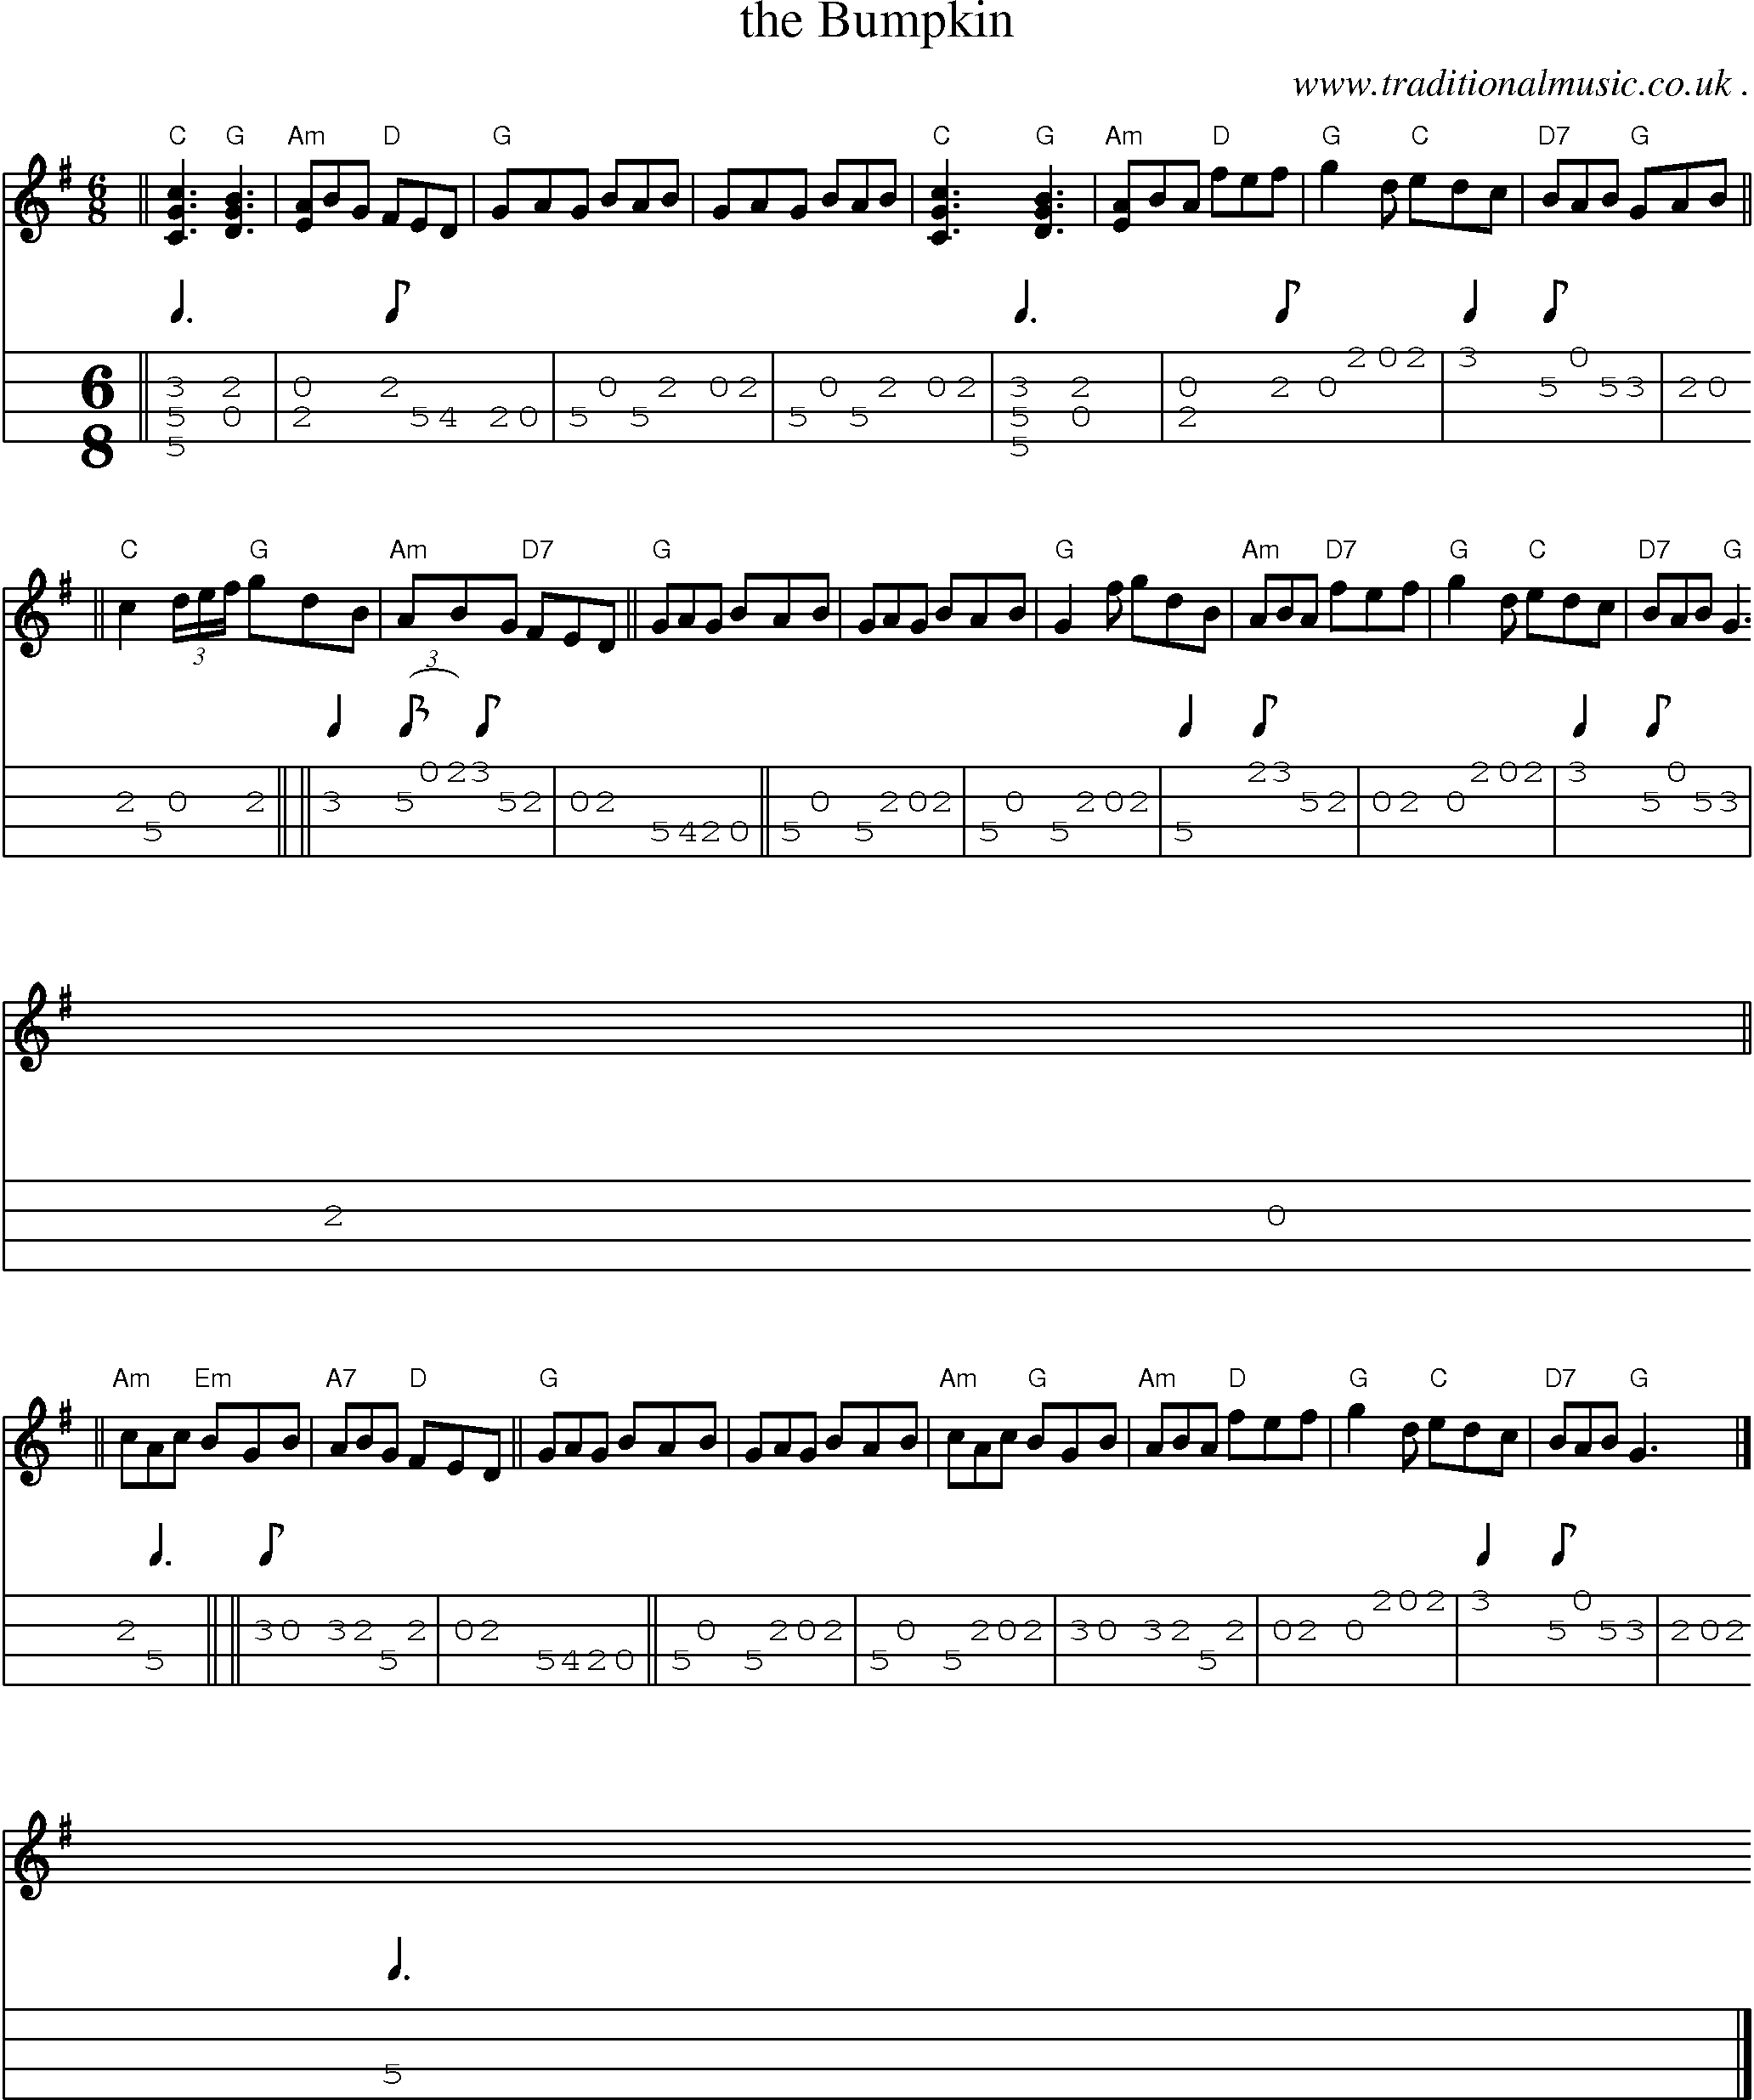 Sheet-music  score, Chords and Mandolin Tabs for The Bumpkin